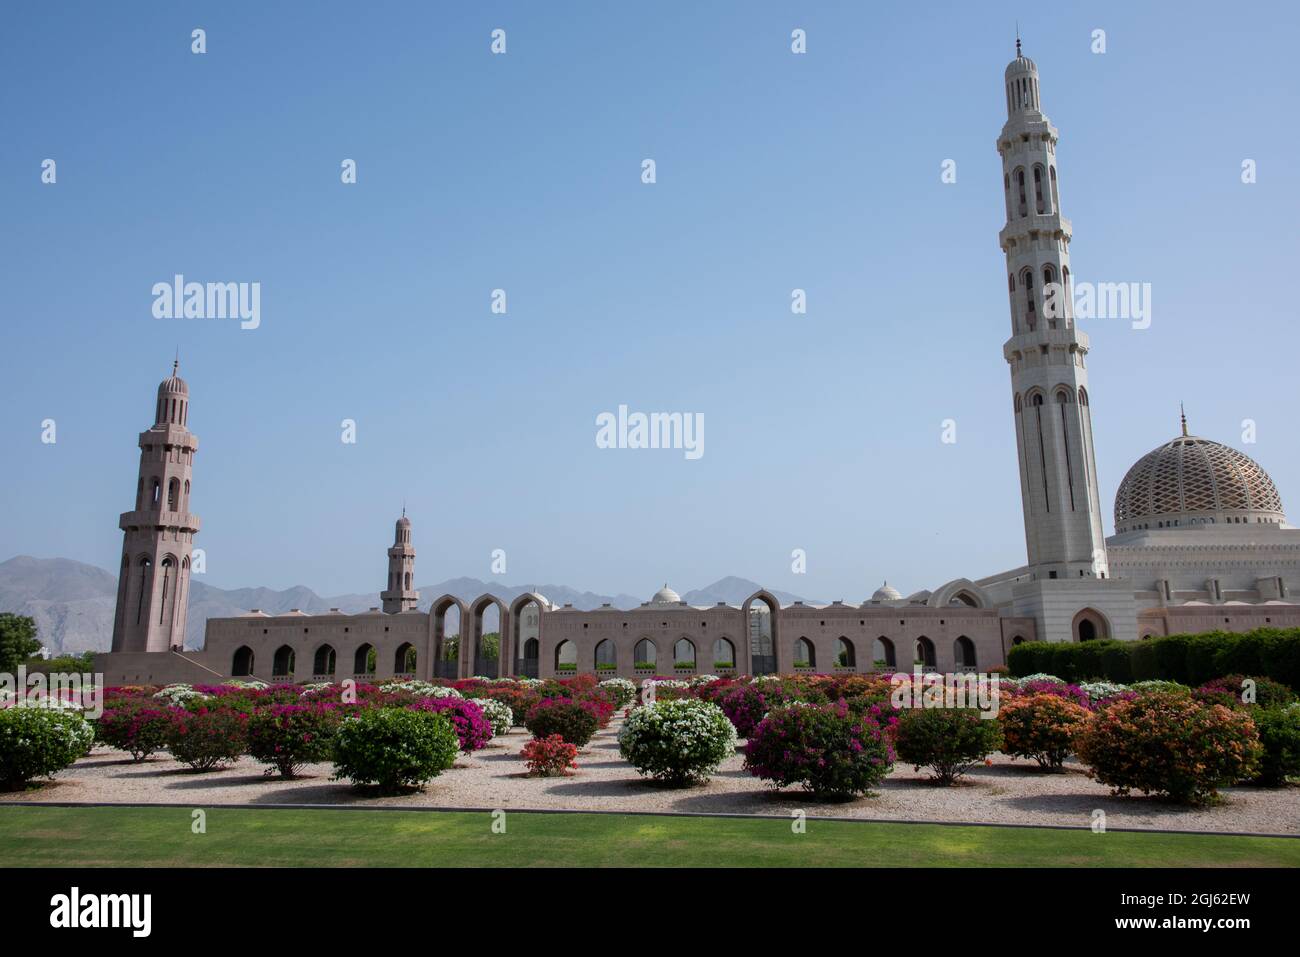 Oman, capital city of Muscat. The Sultan Qaboos Grand Mosque, the main mosque in the Sultanate of Oman. Stock Photo